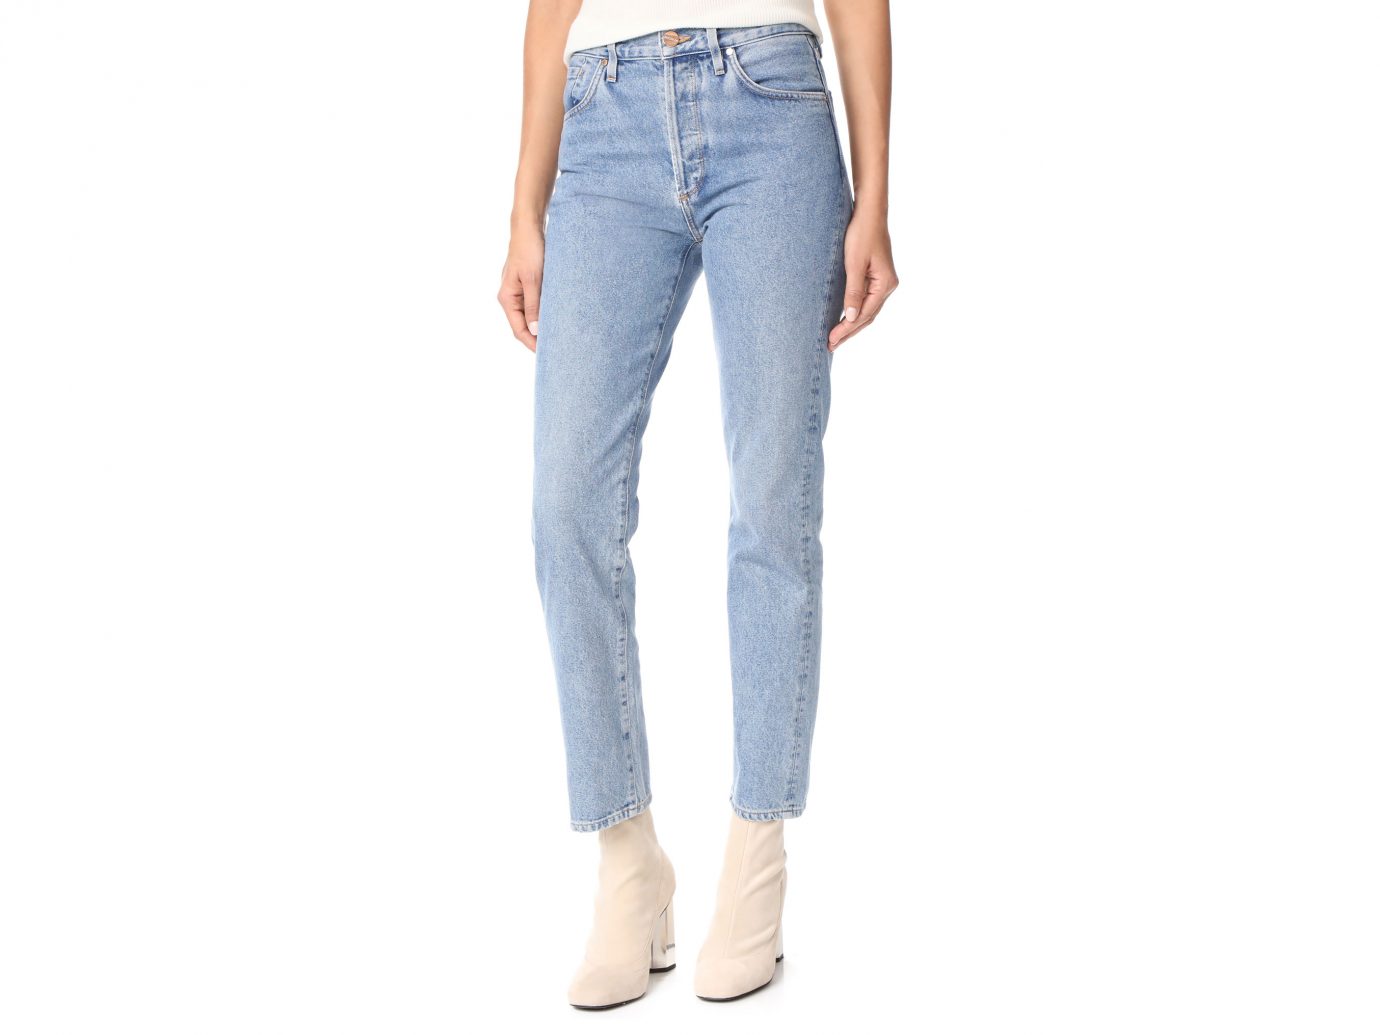 Shop Women's Spring Jeans and Denim On Sale Now | Jetsetter